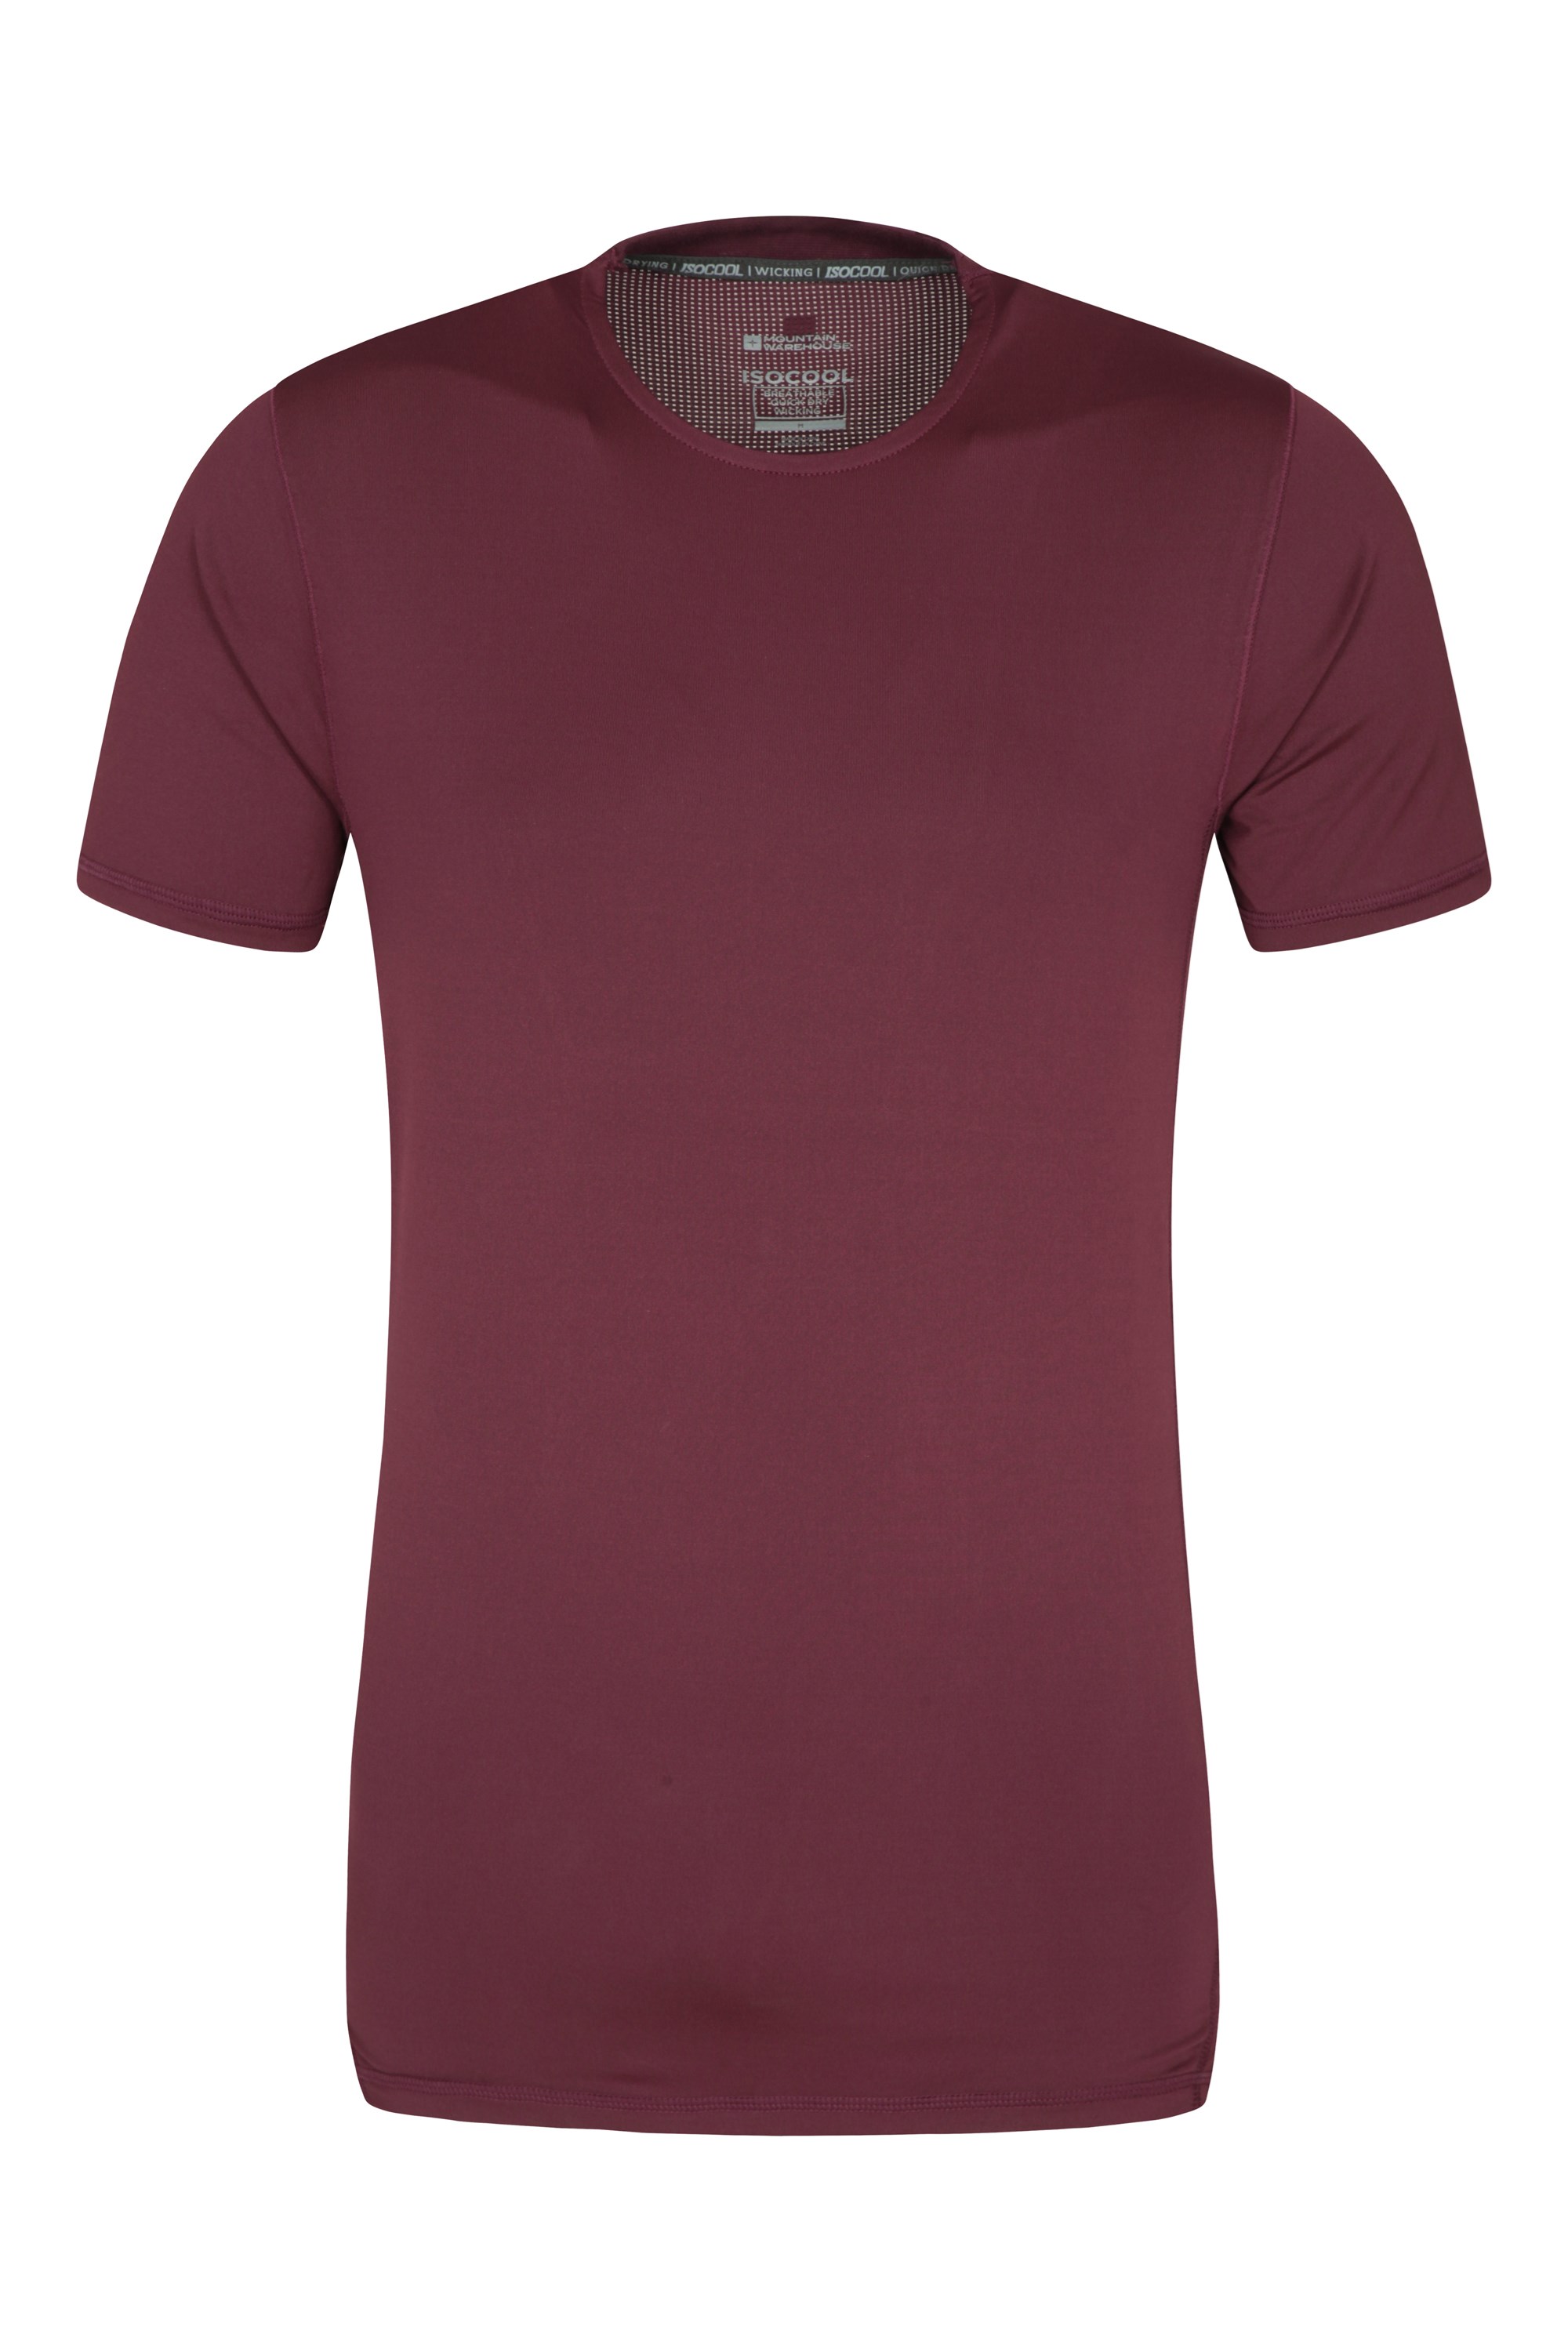 Tee-shirt Mantra IsoCool homme - Bordeaux